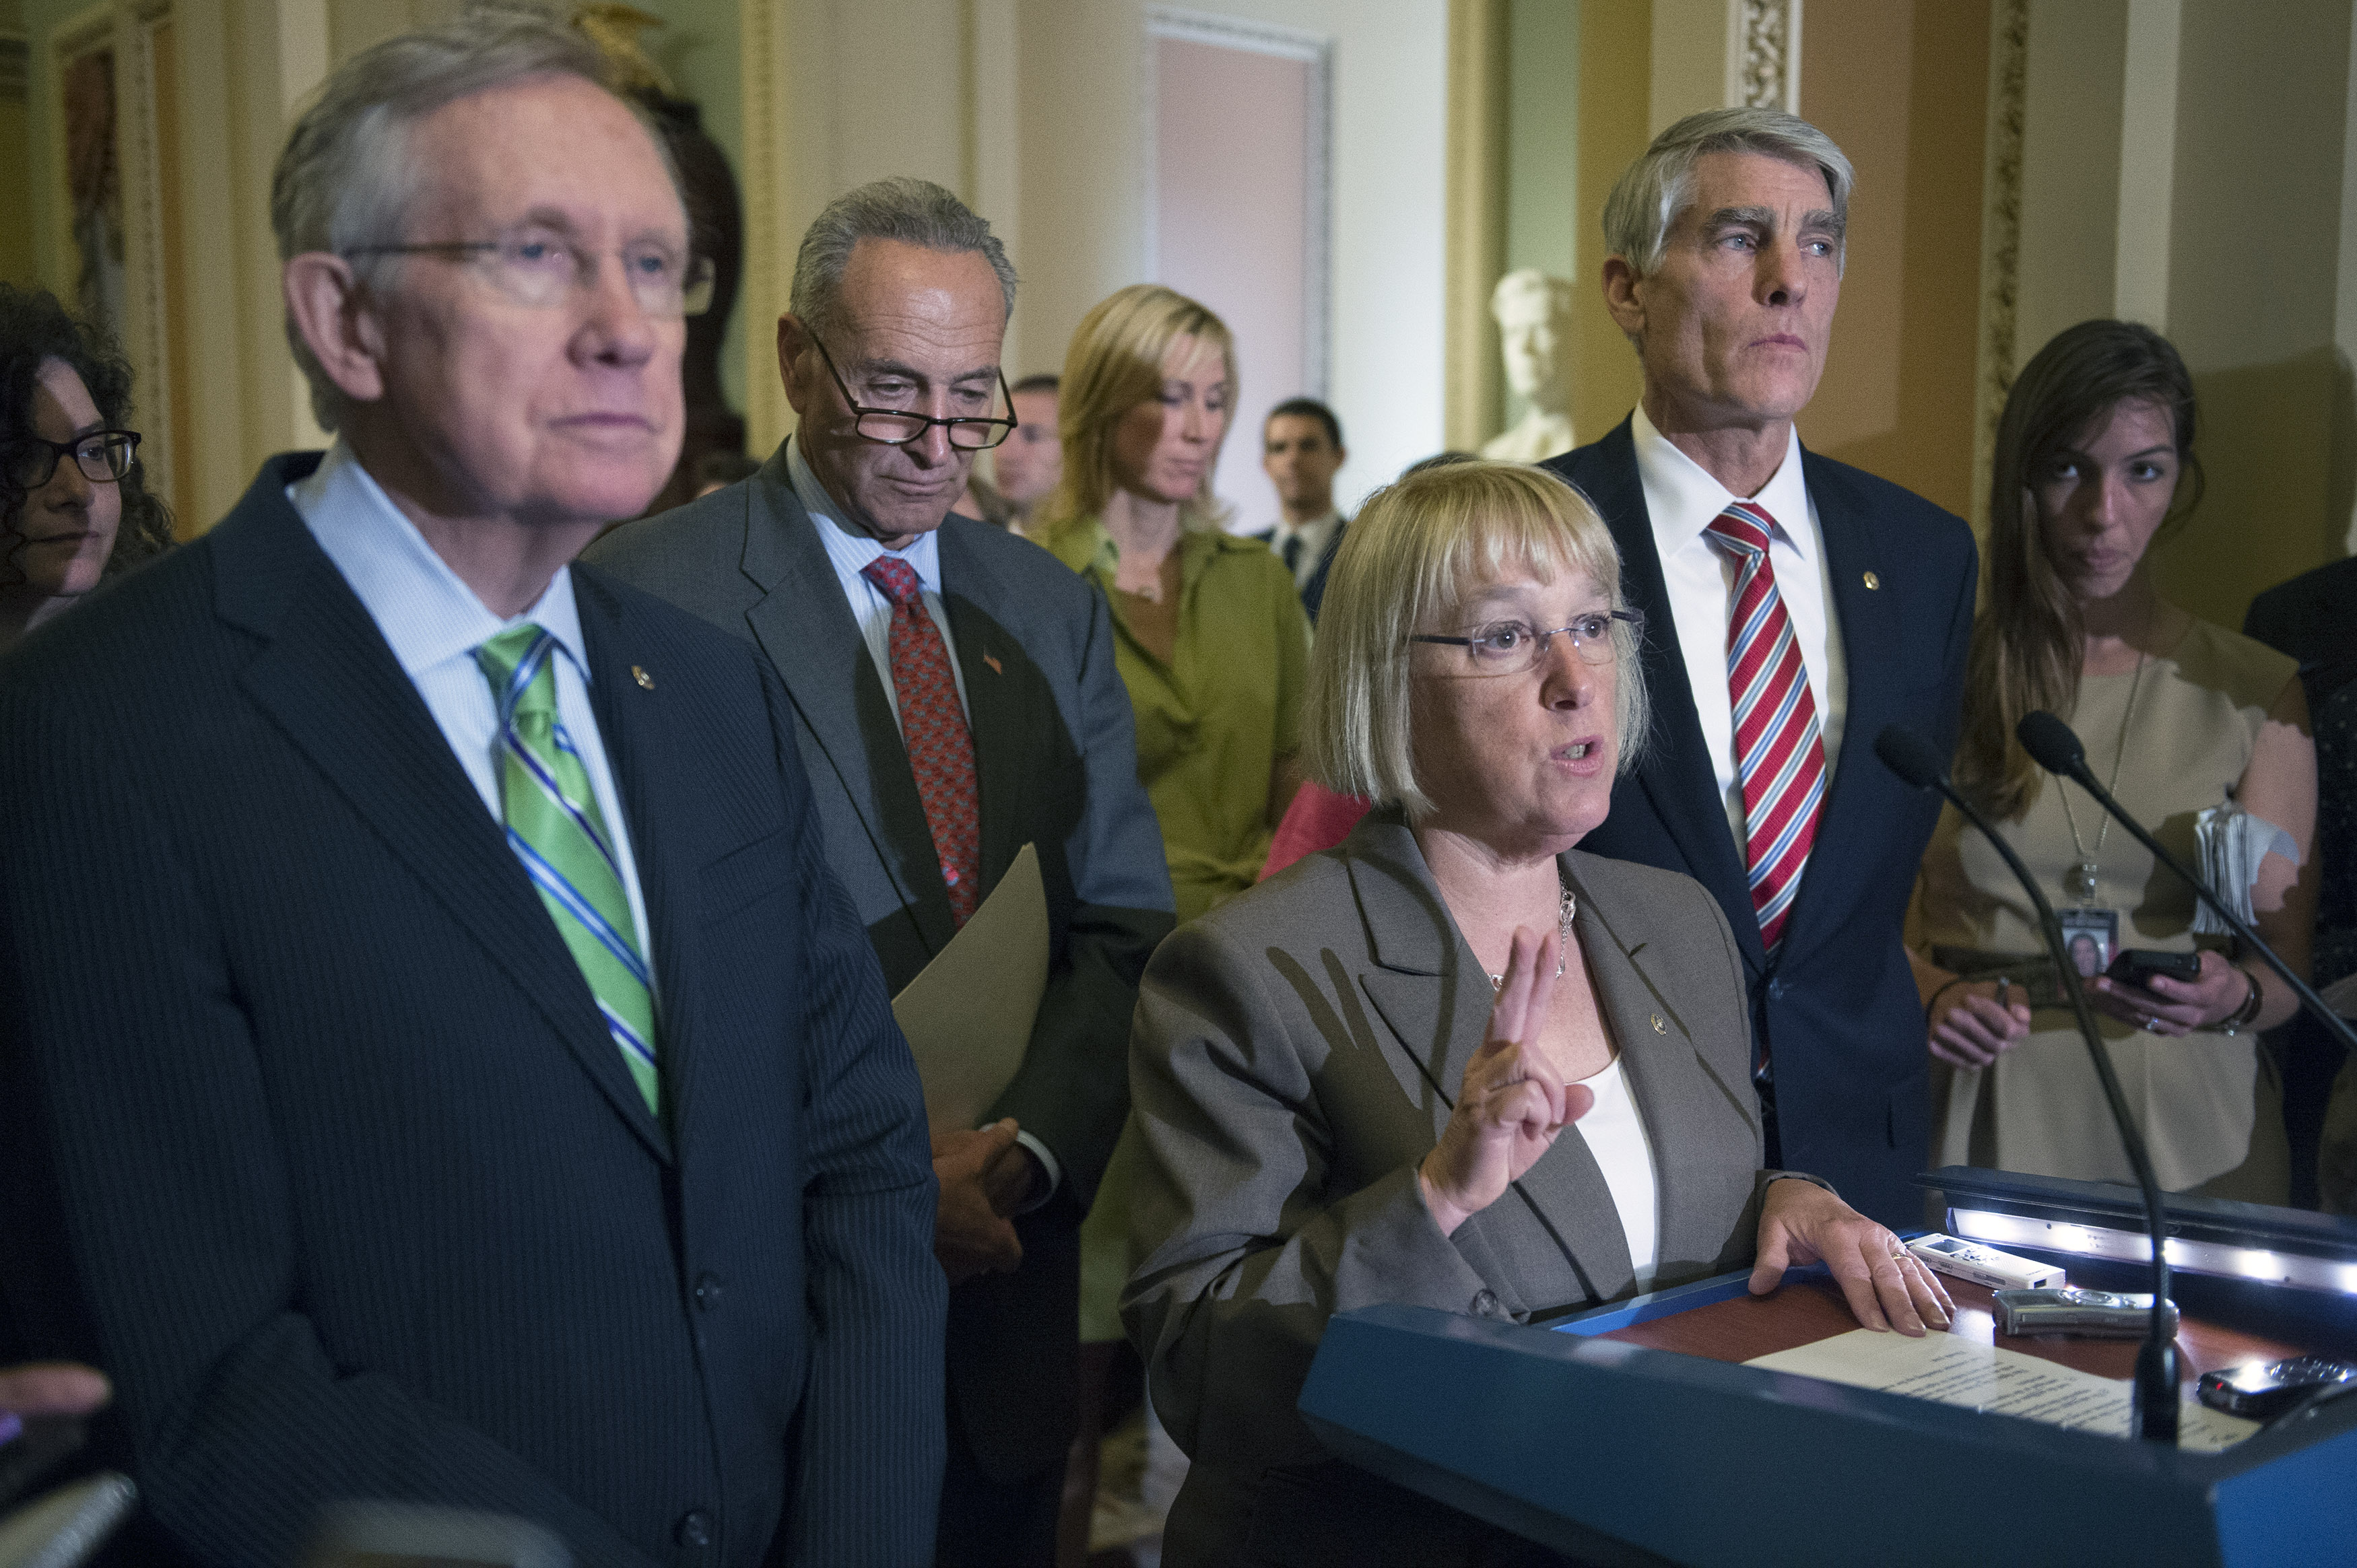 Sen. Patty Murray, D-Was,.  is joined by Sen. Mark Udall, D-Col,. Senate Majority Leader Harry Reid D-Nev., and Sen. Charles Schumer, D-N.Y., at a news conference following a procedural vote on S.2578, the "Protect Women's Heath From Cooperate Interference Act of 2014,"  July 16, 2014 in Washington, DC. (Kevin Dietsch—UPI/Landov)